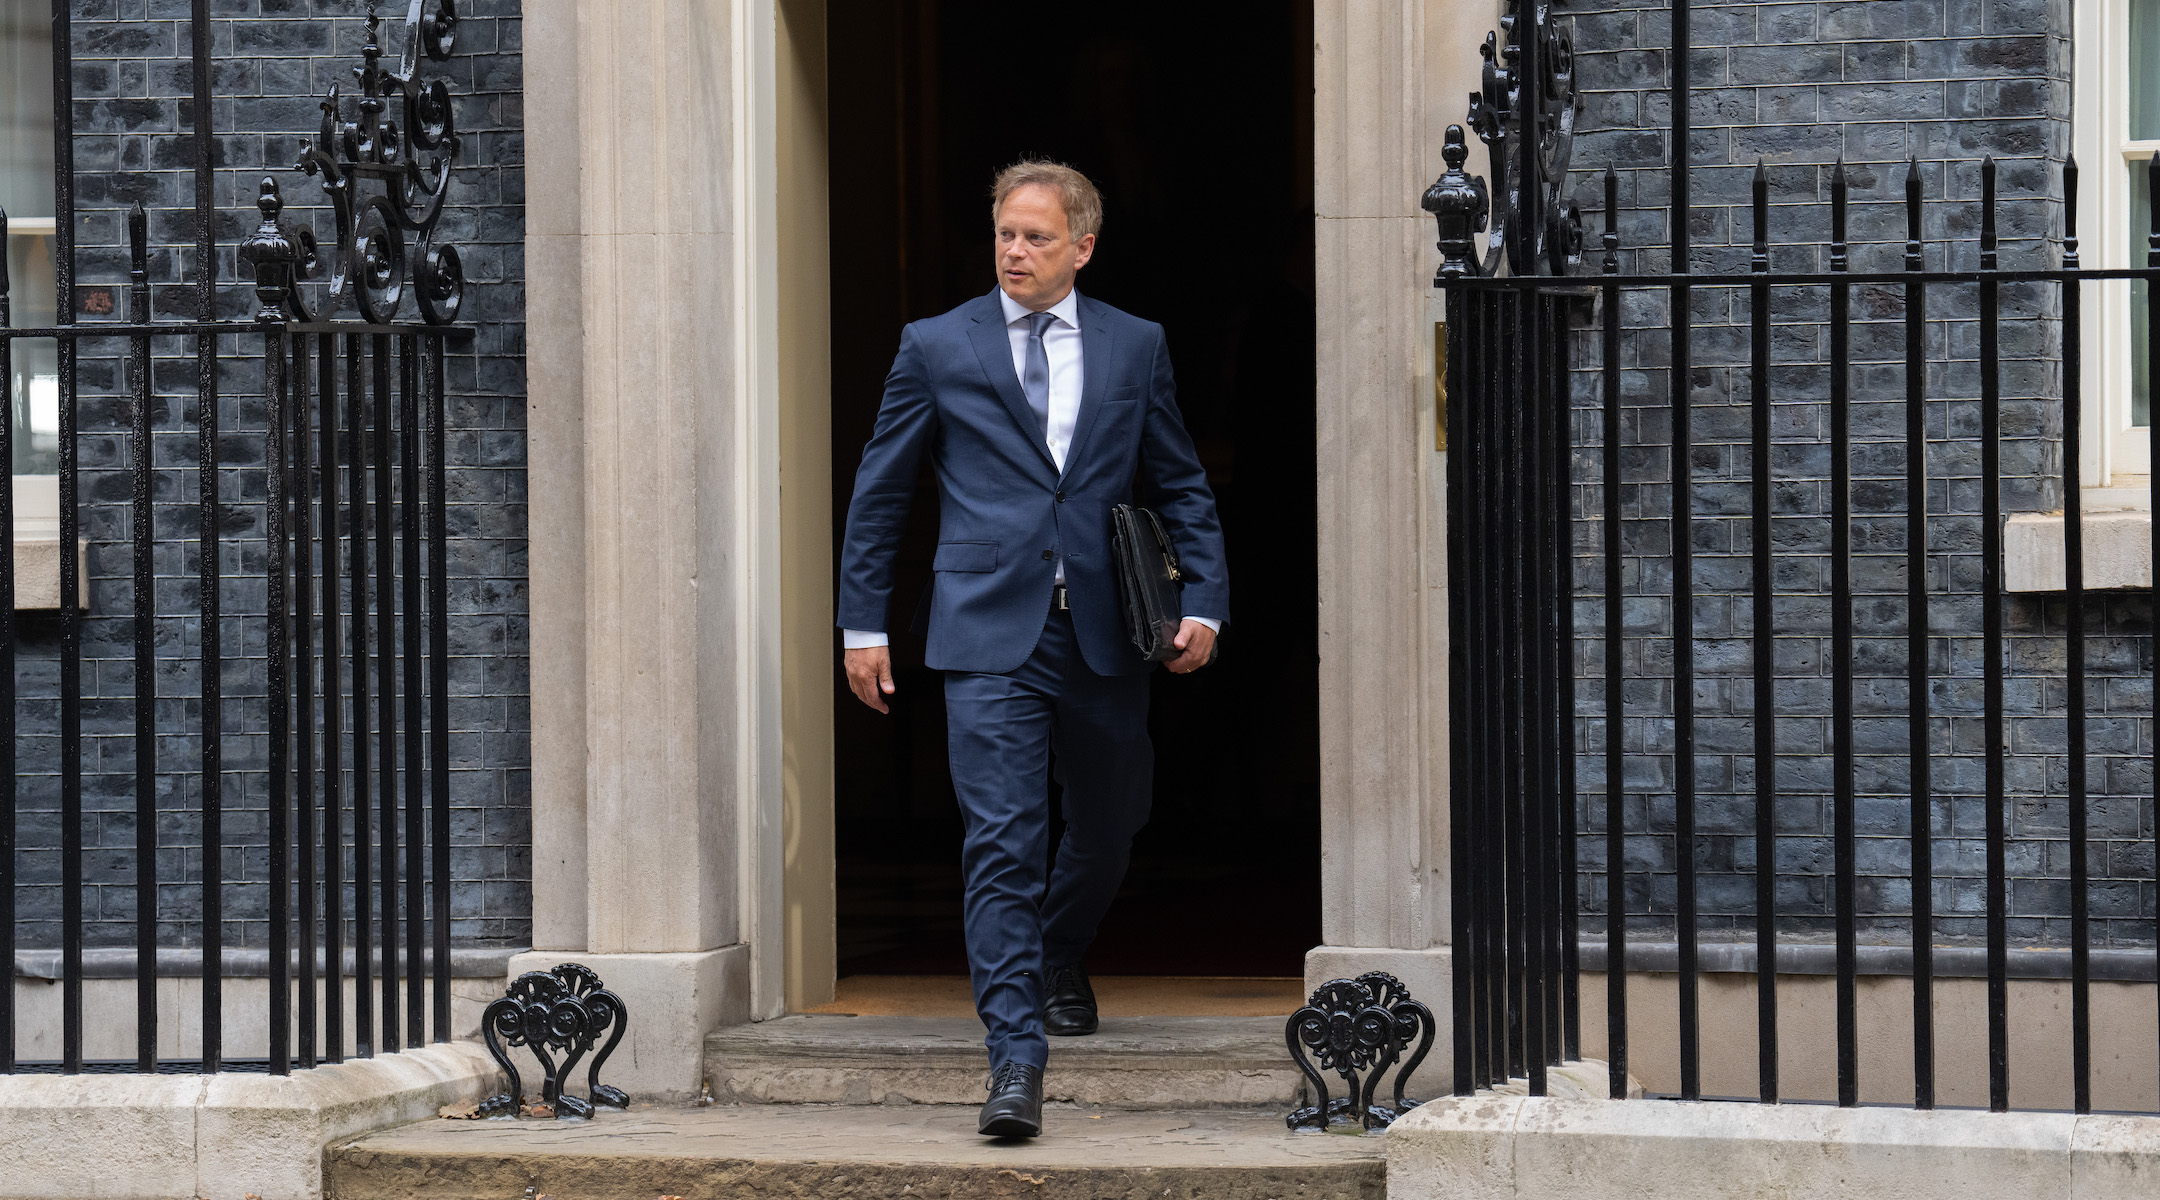 Grant Shapps leaves 10 Downing Street